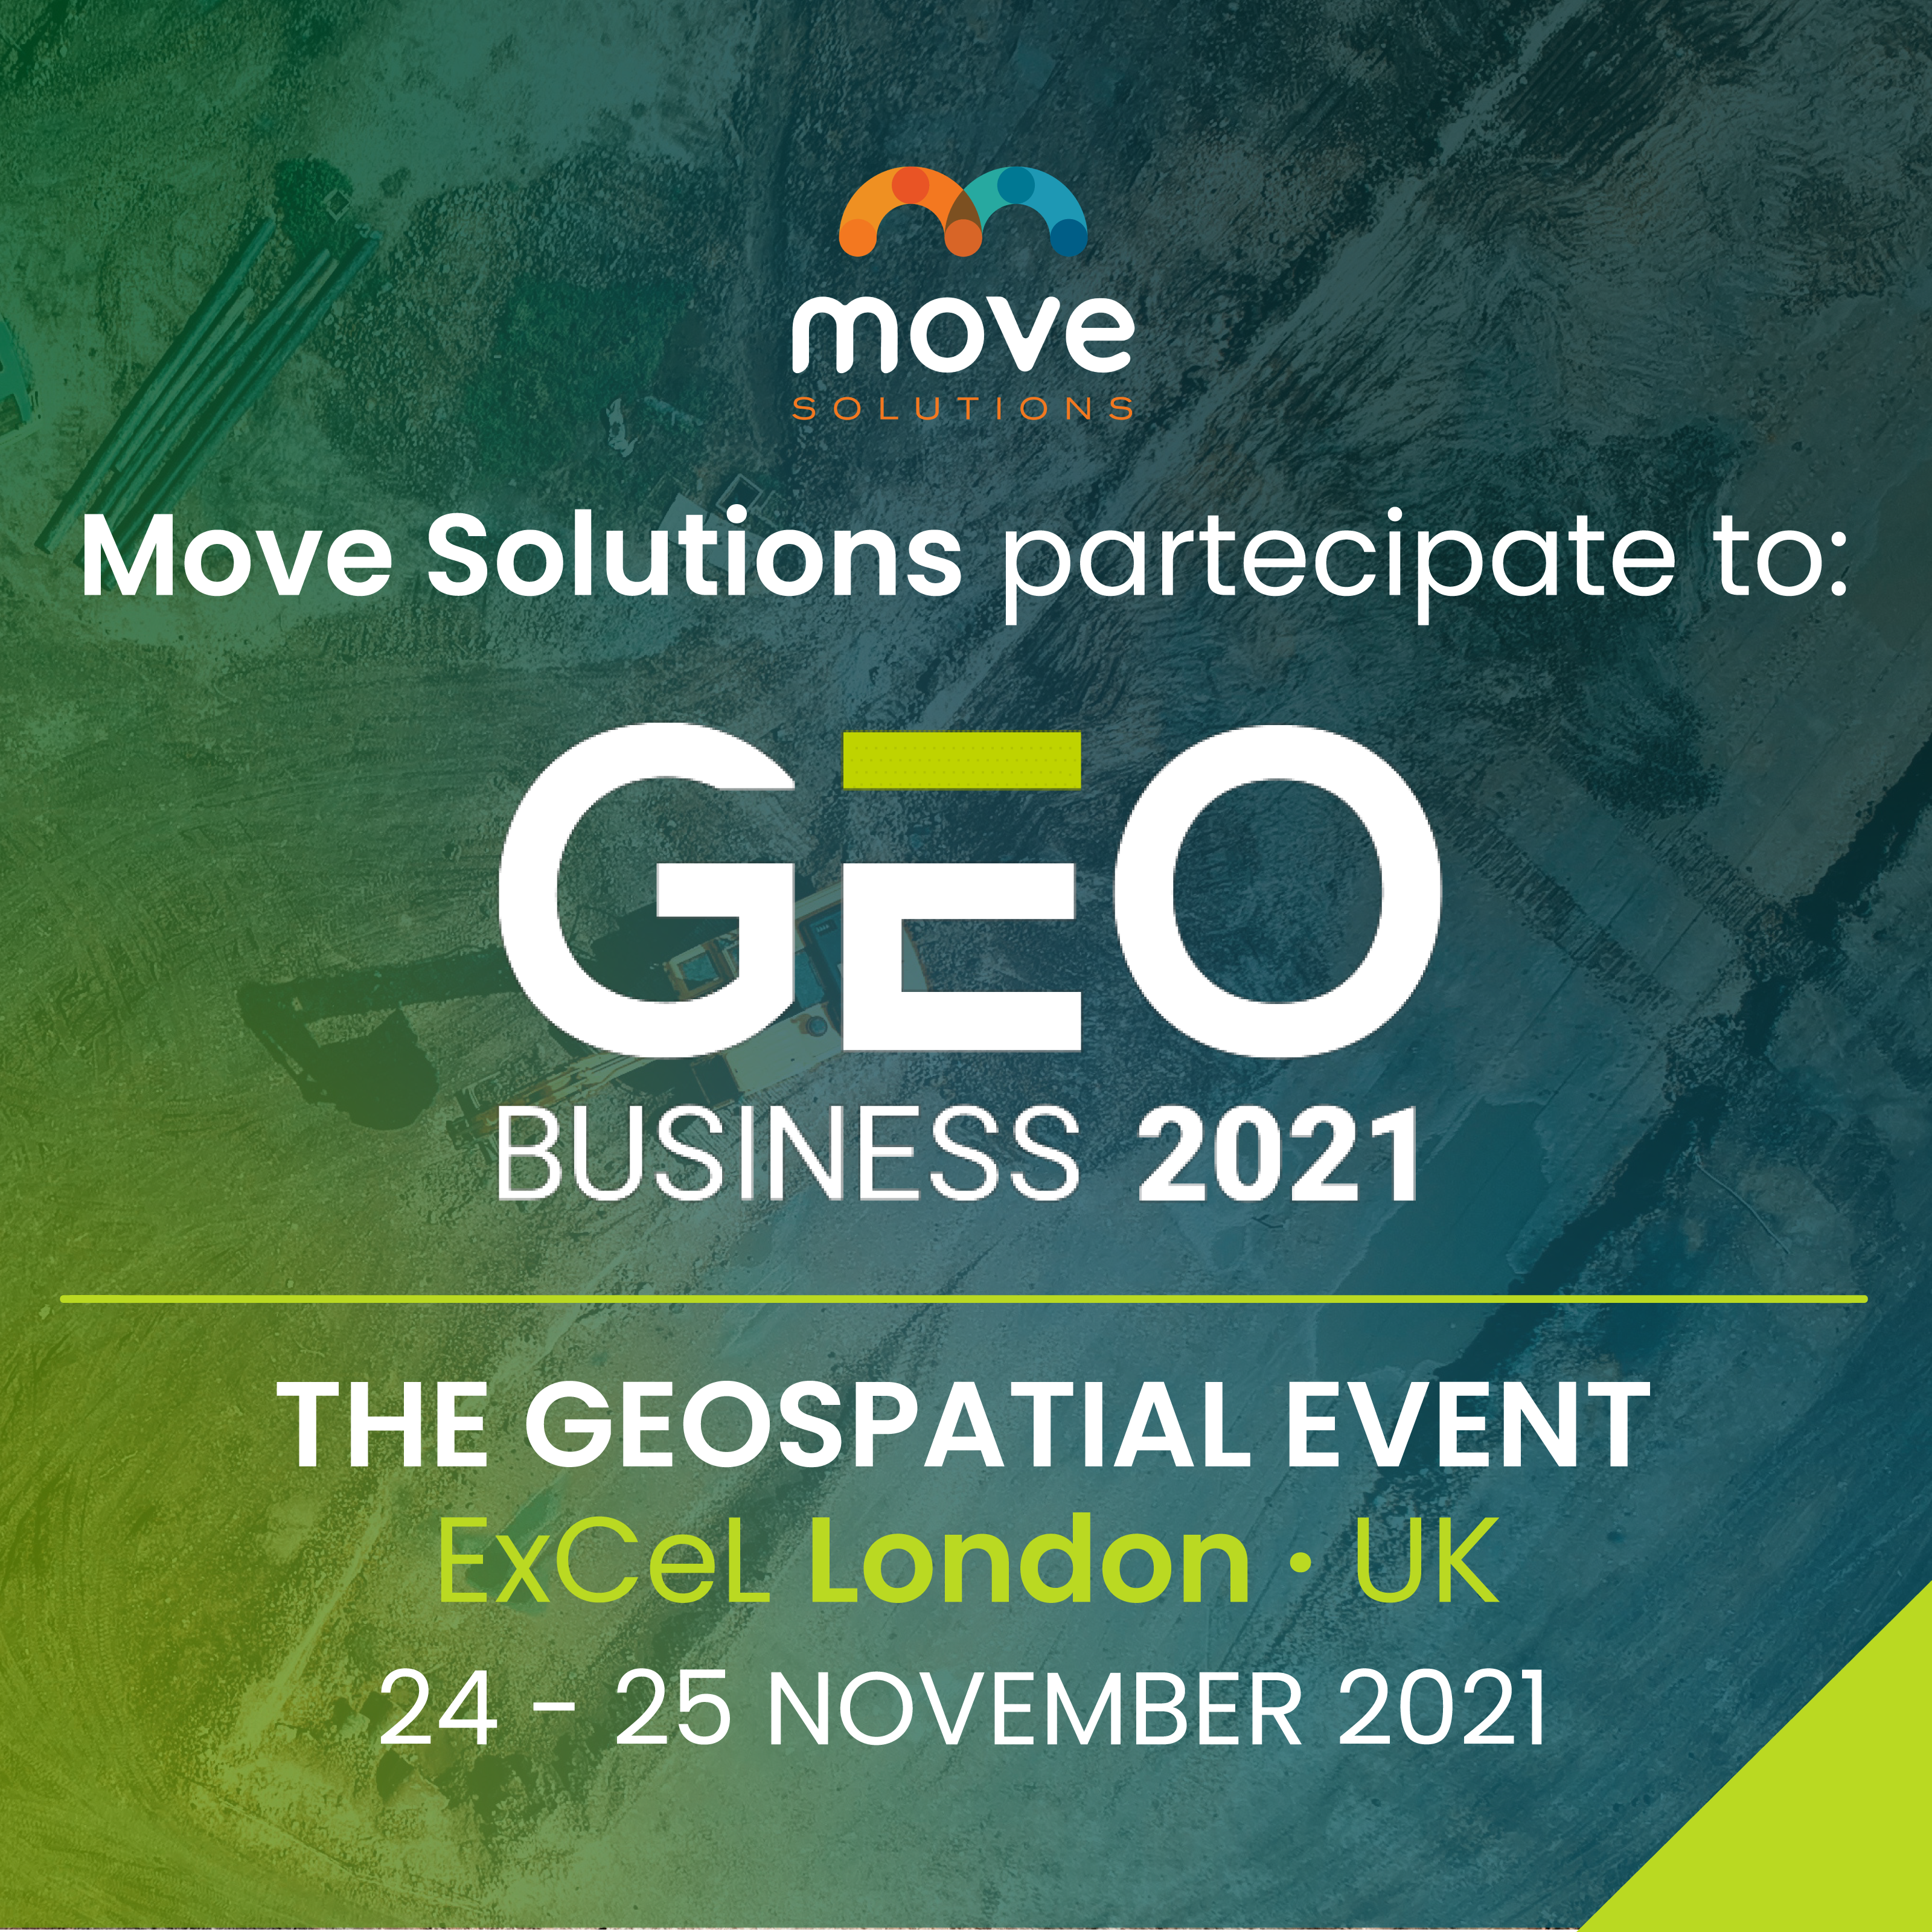 Move Solutions GEO BUSINESS